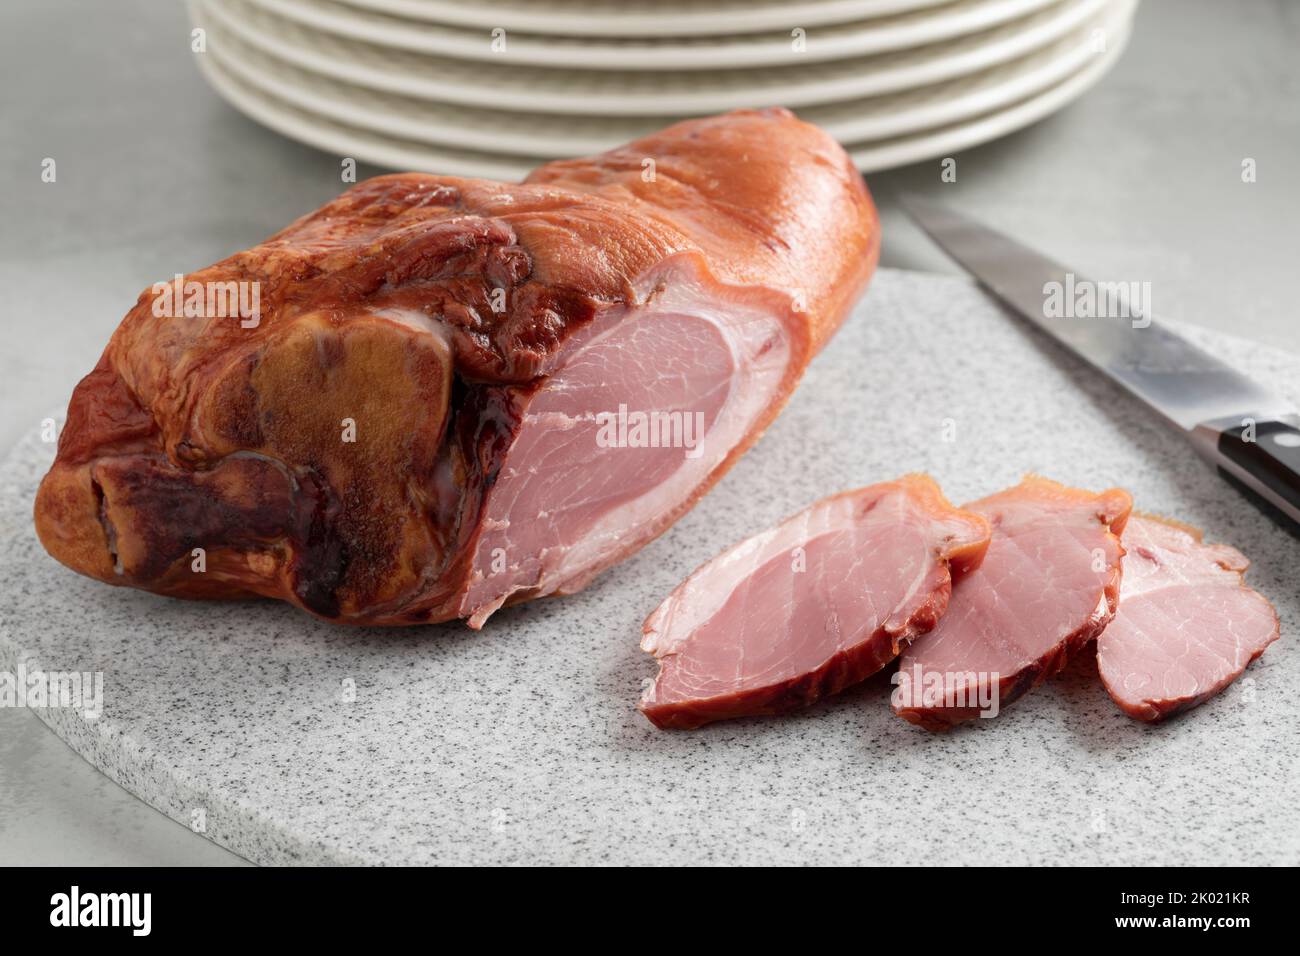 Traditional Croatian  smoked pork knuckle and slices on a cutting board close up Stock Photo